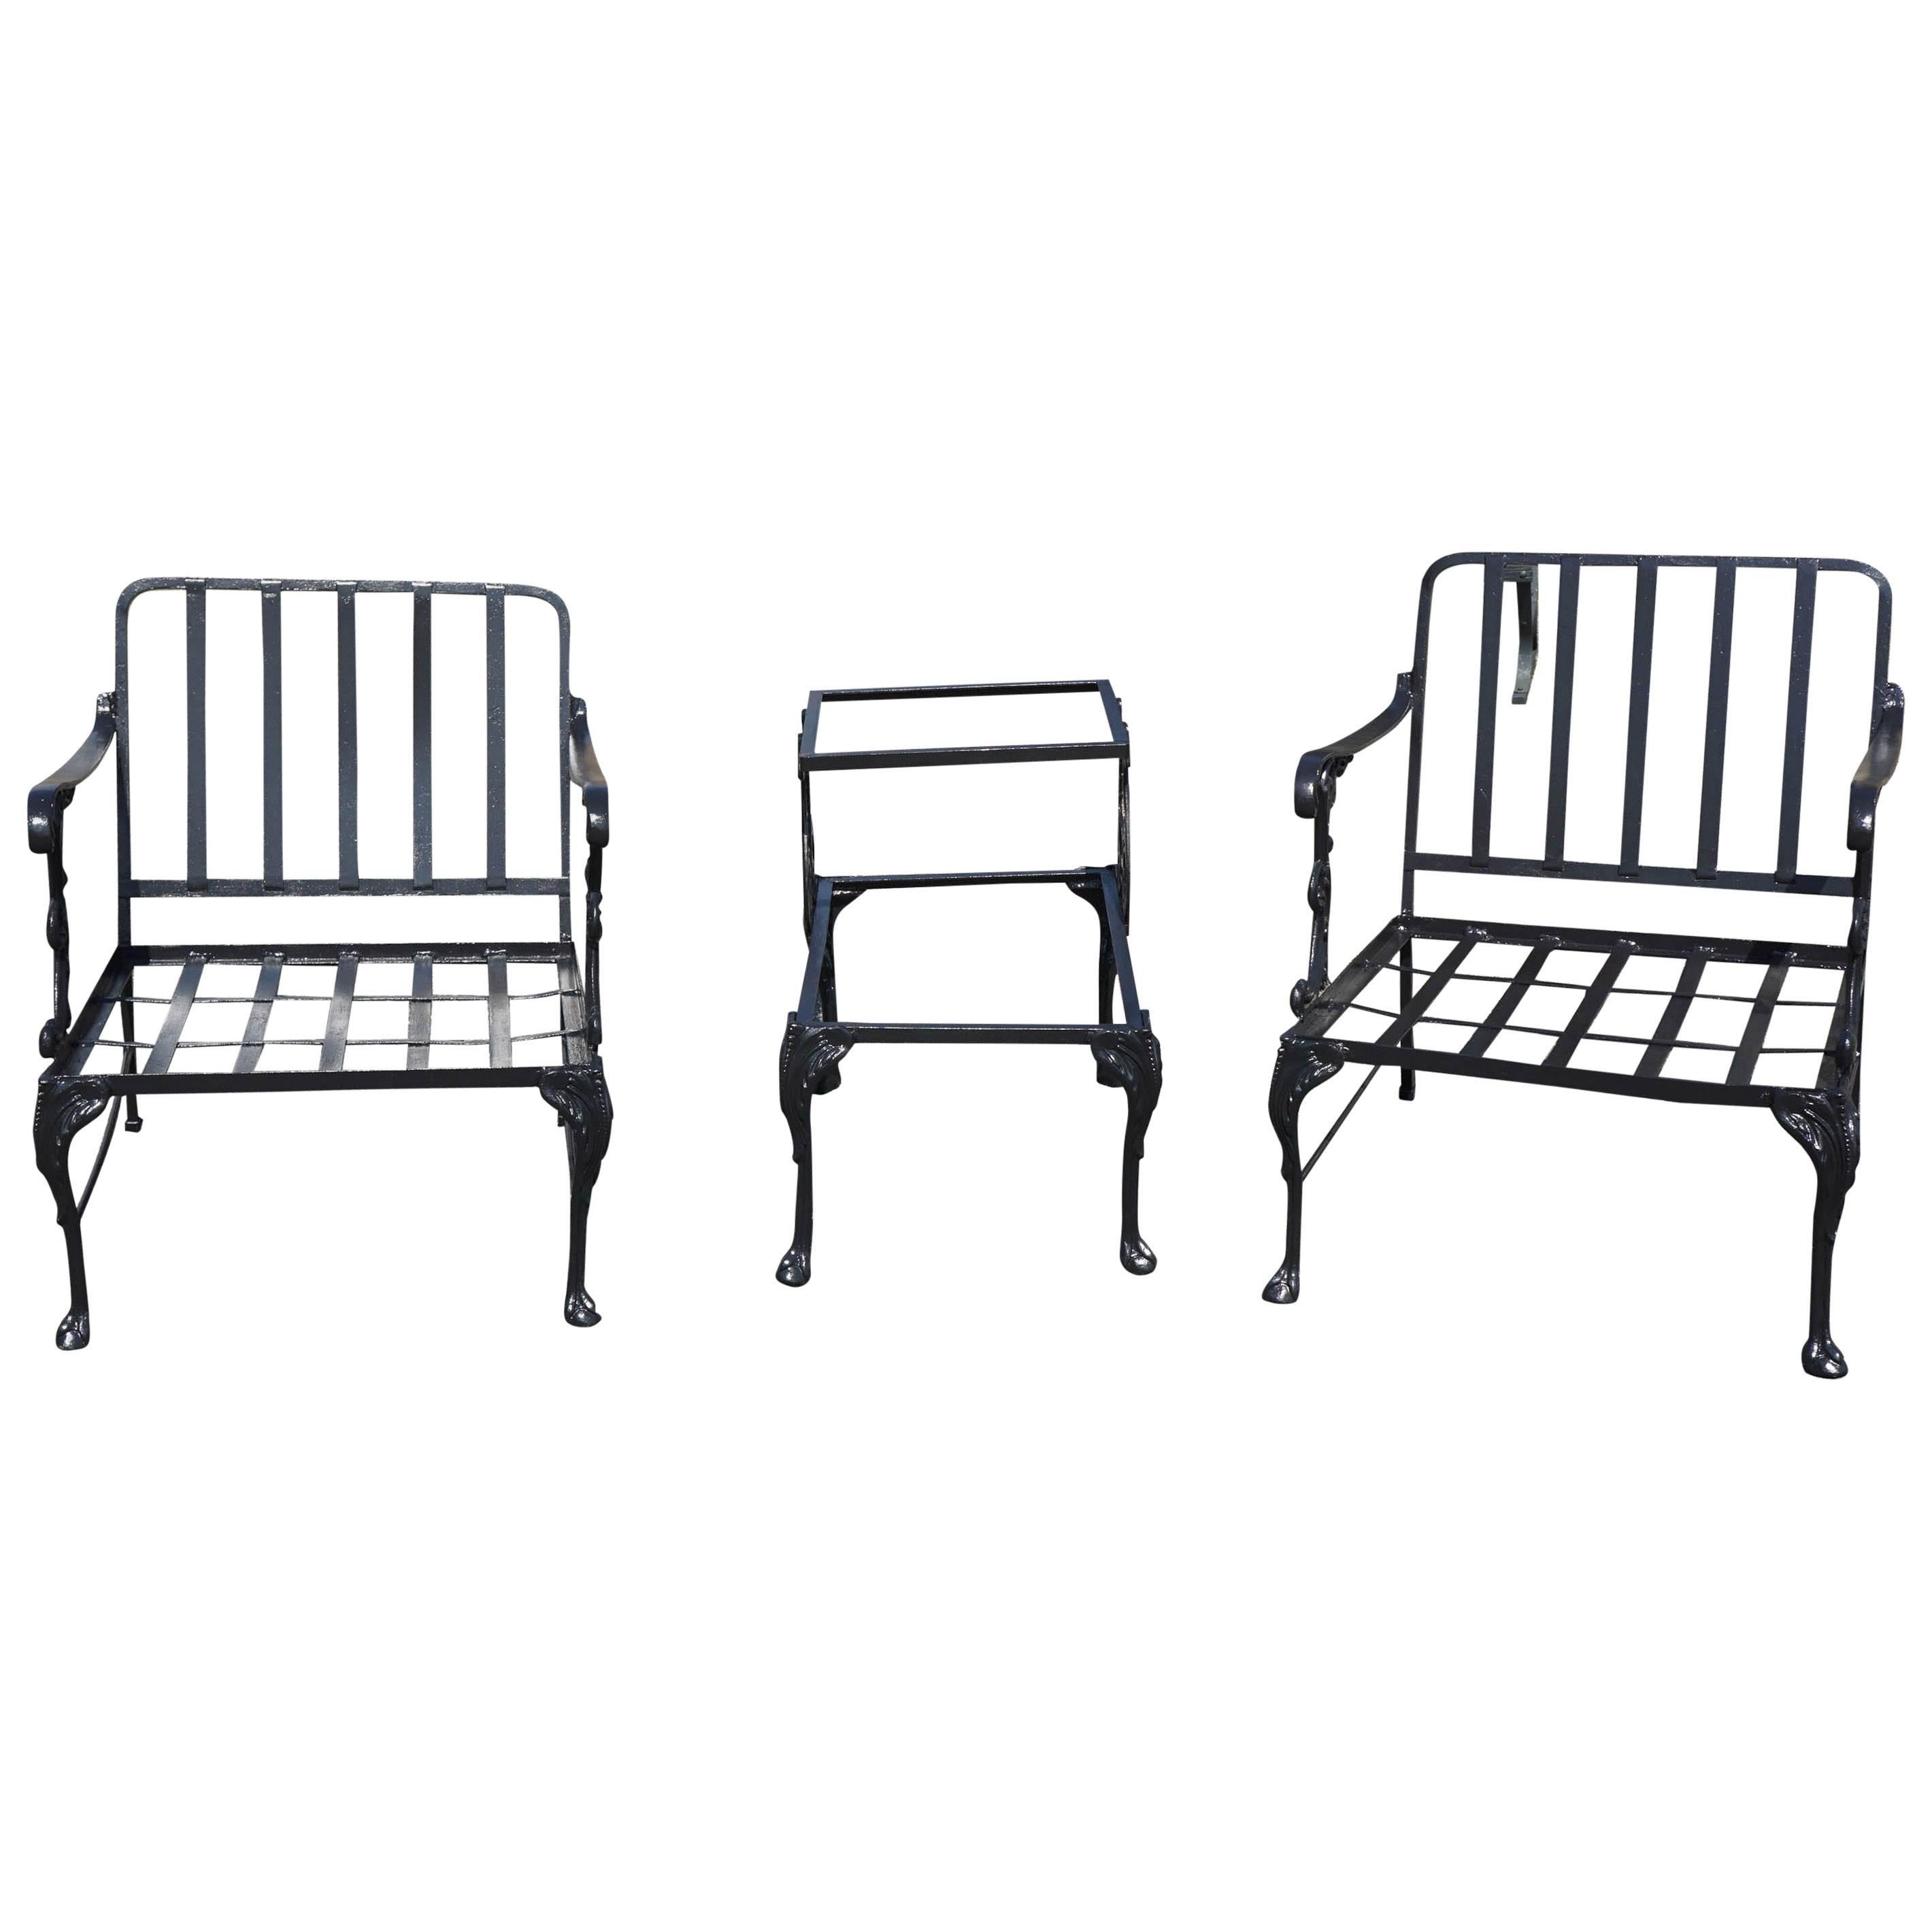 Vintage Outdoor Porch or Garden Lounge Chairs with Matching Table